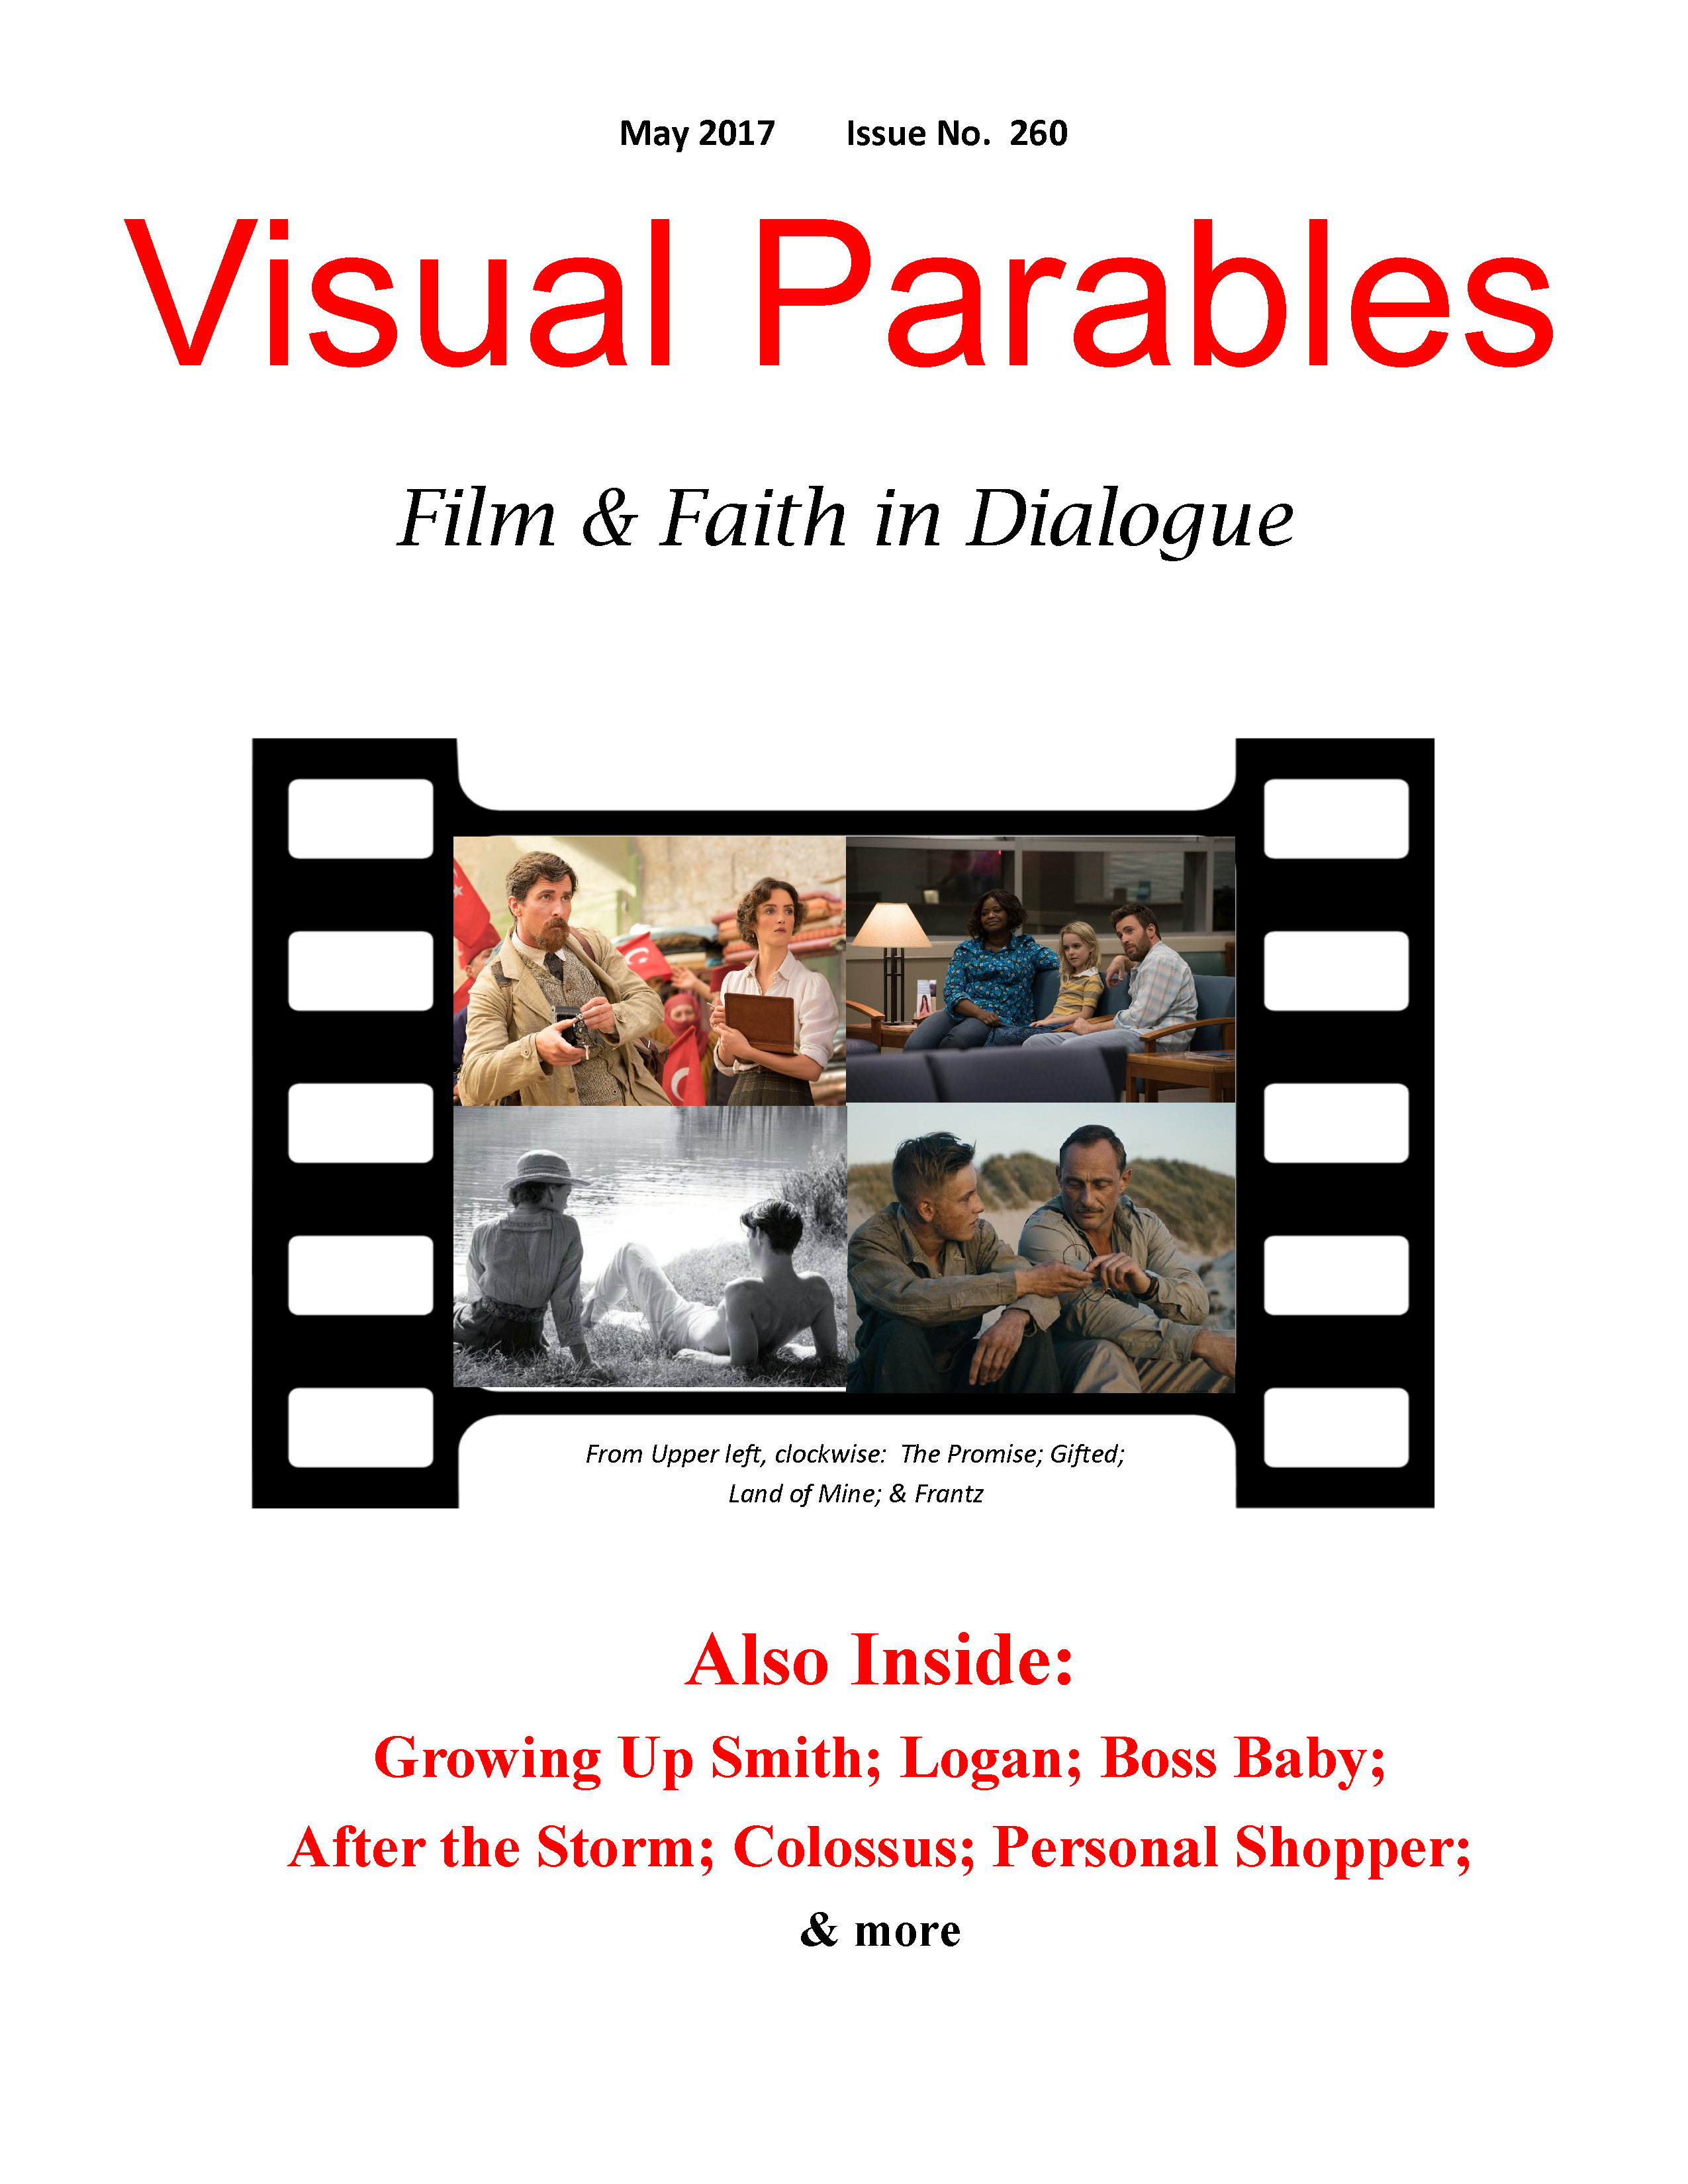 May 2017 issue of Visual Parables